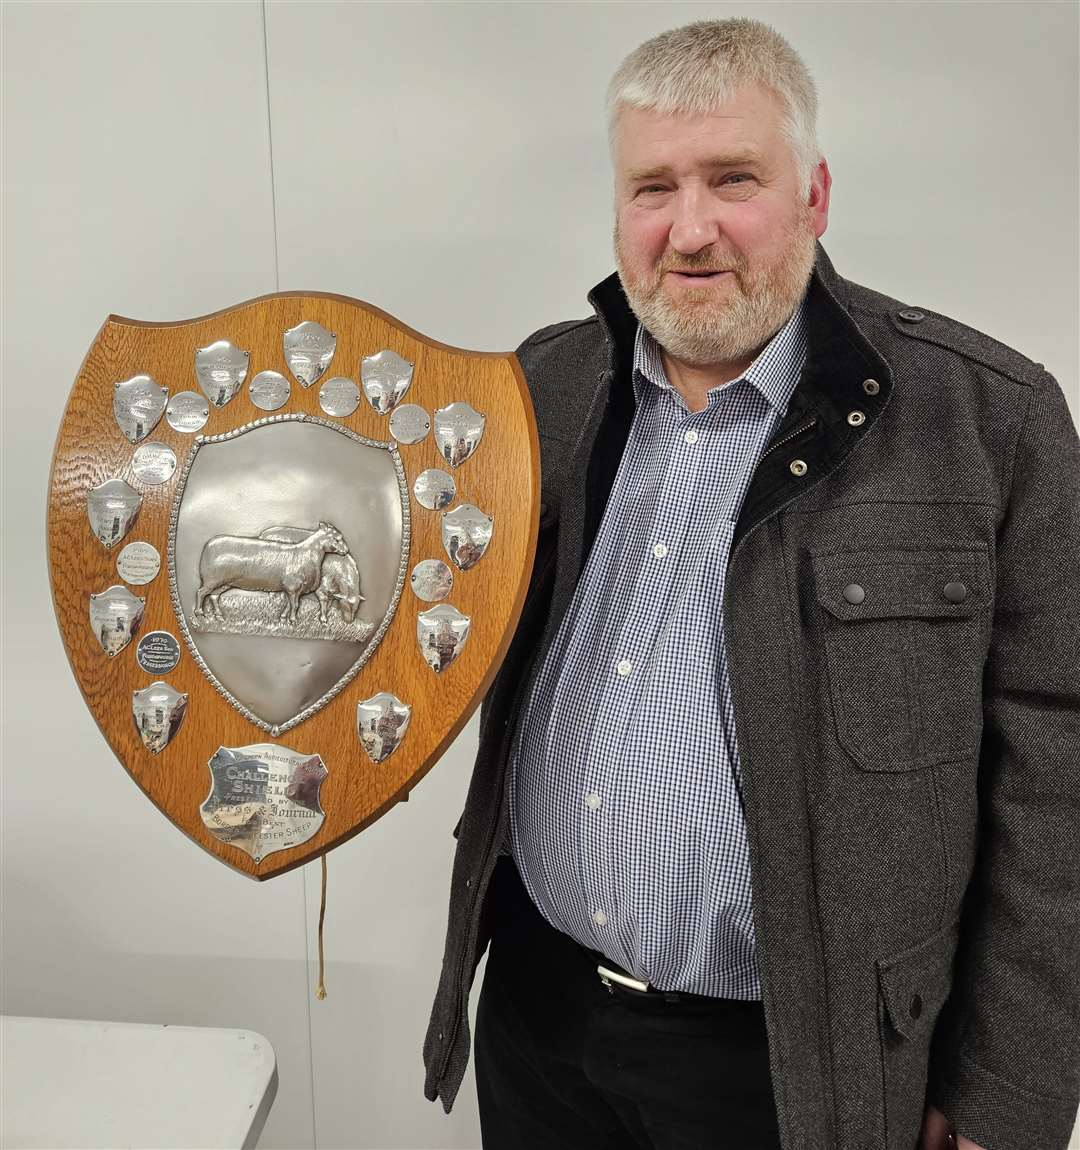 RNAS junior vice president Brian Ross with the shield